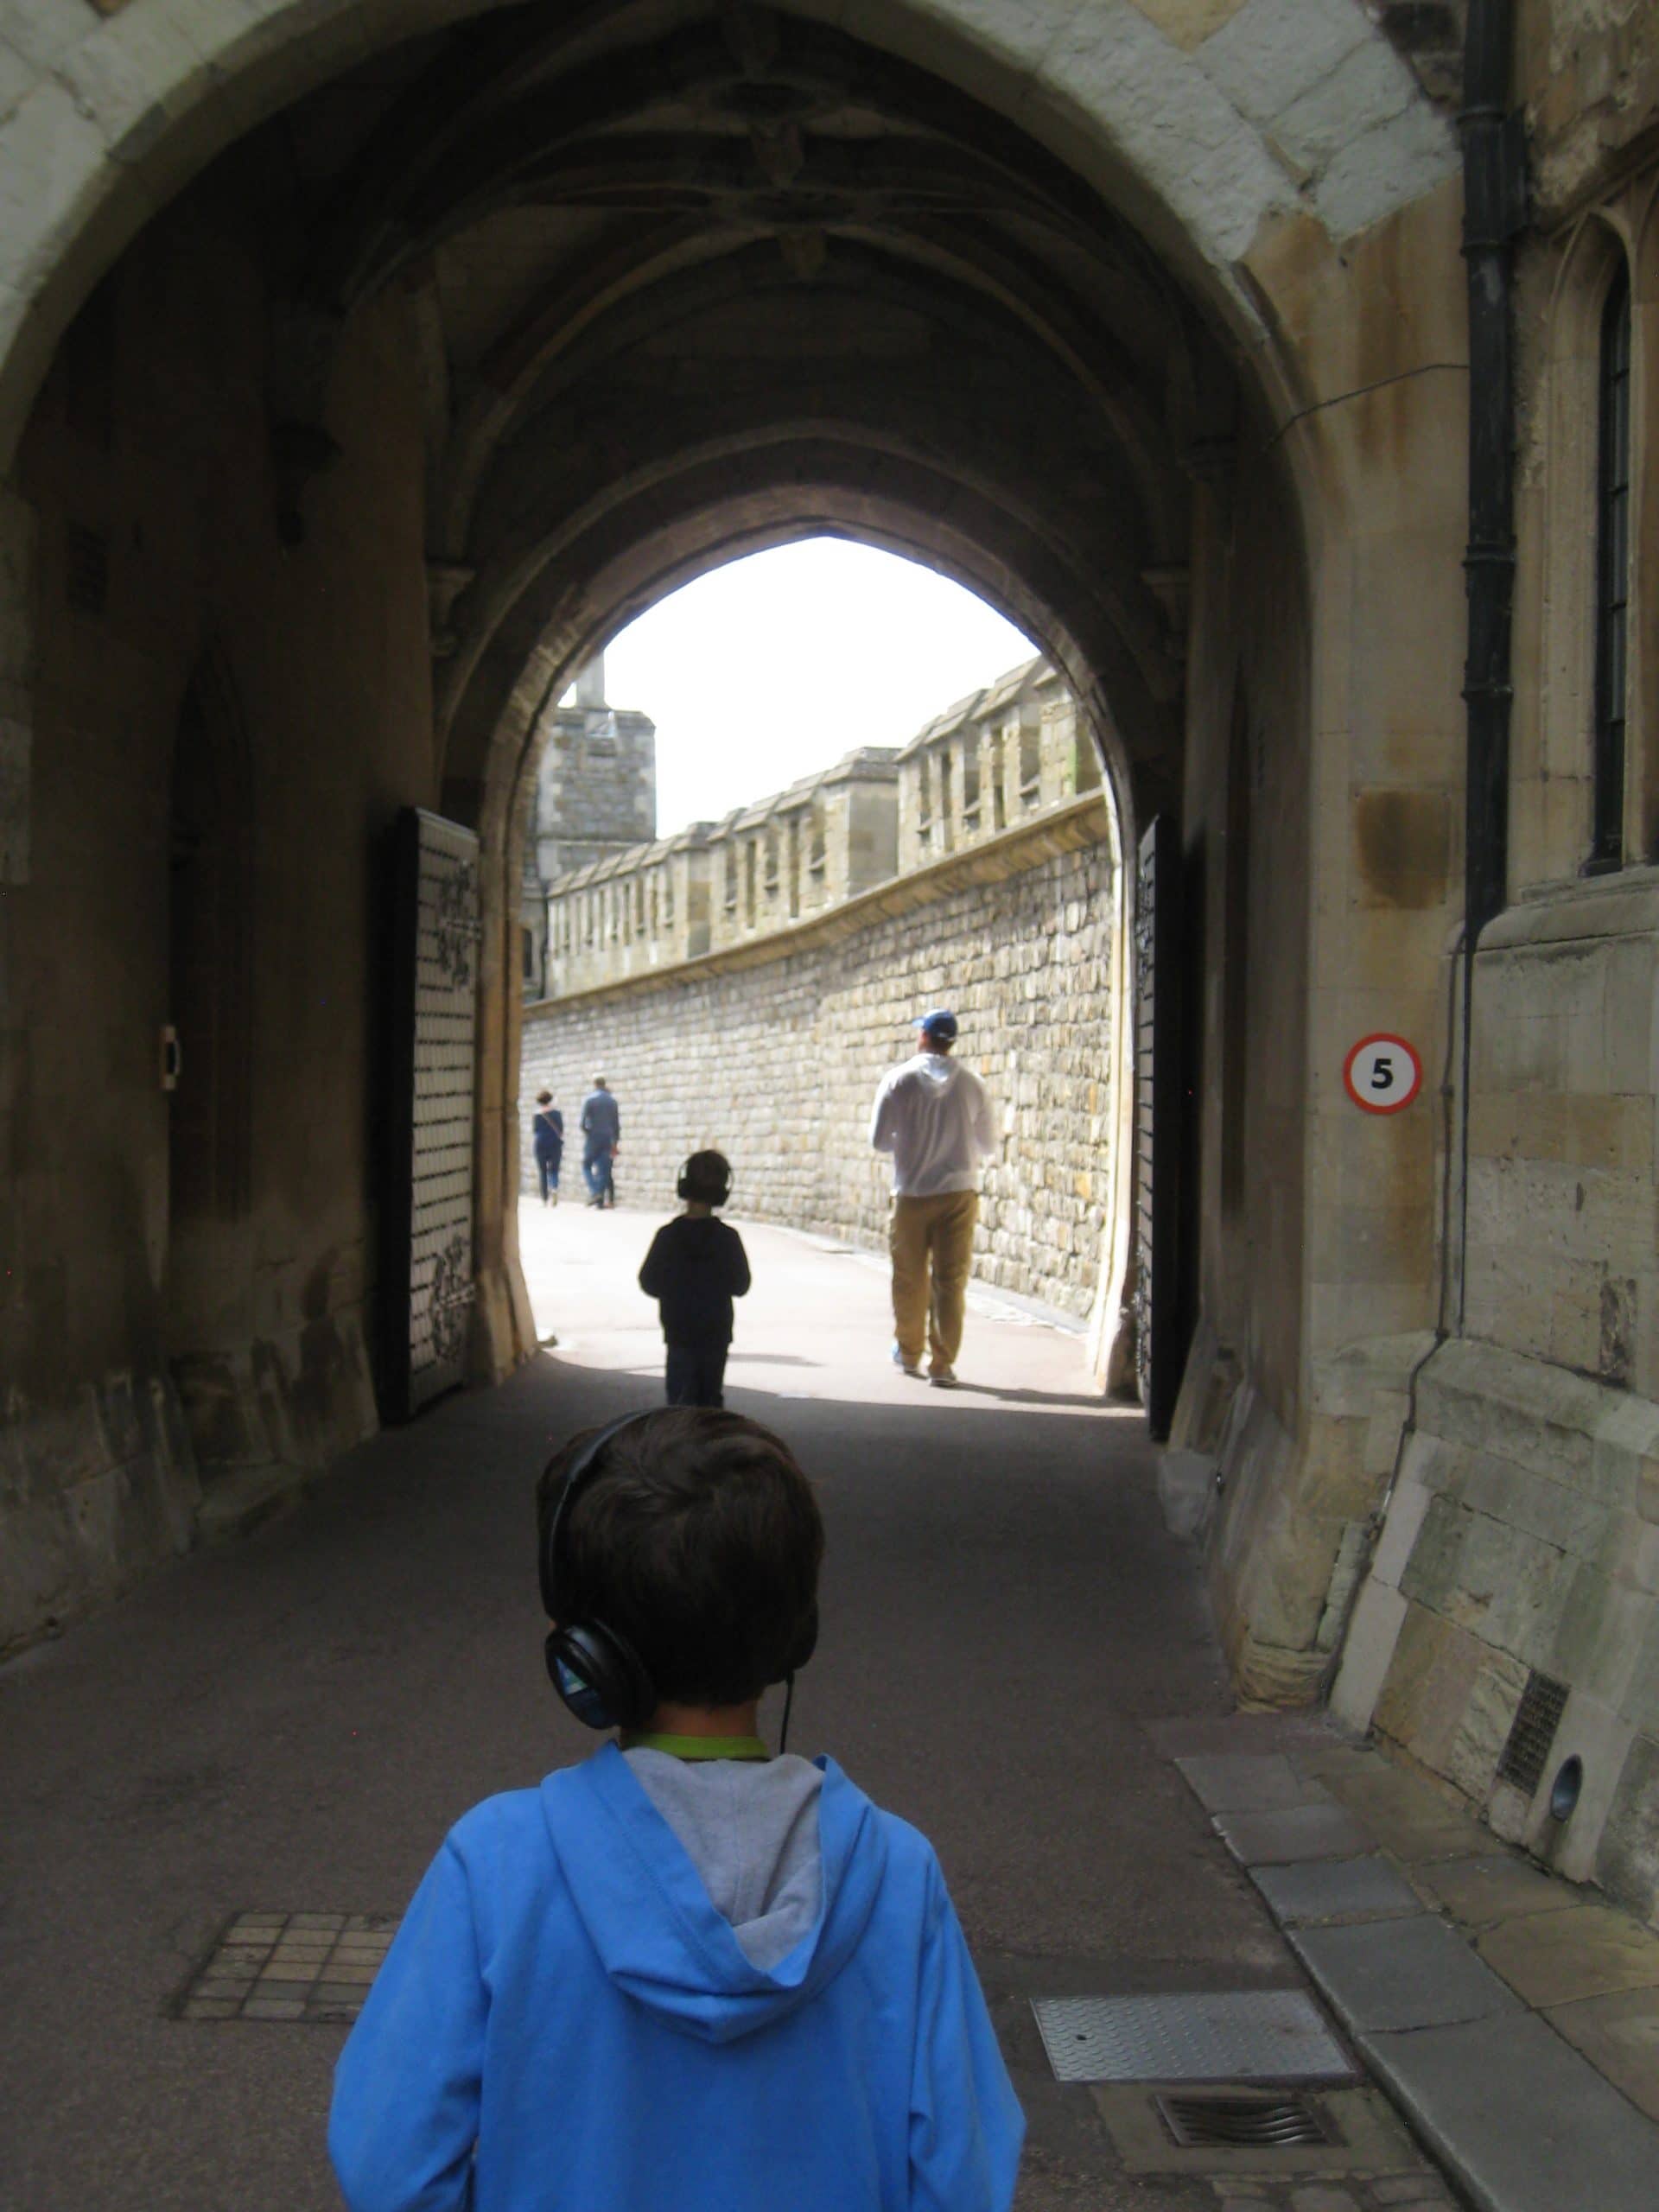 The boys were eager to wander through Windsor Castle with their audio tour.